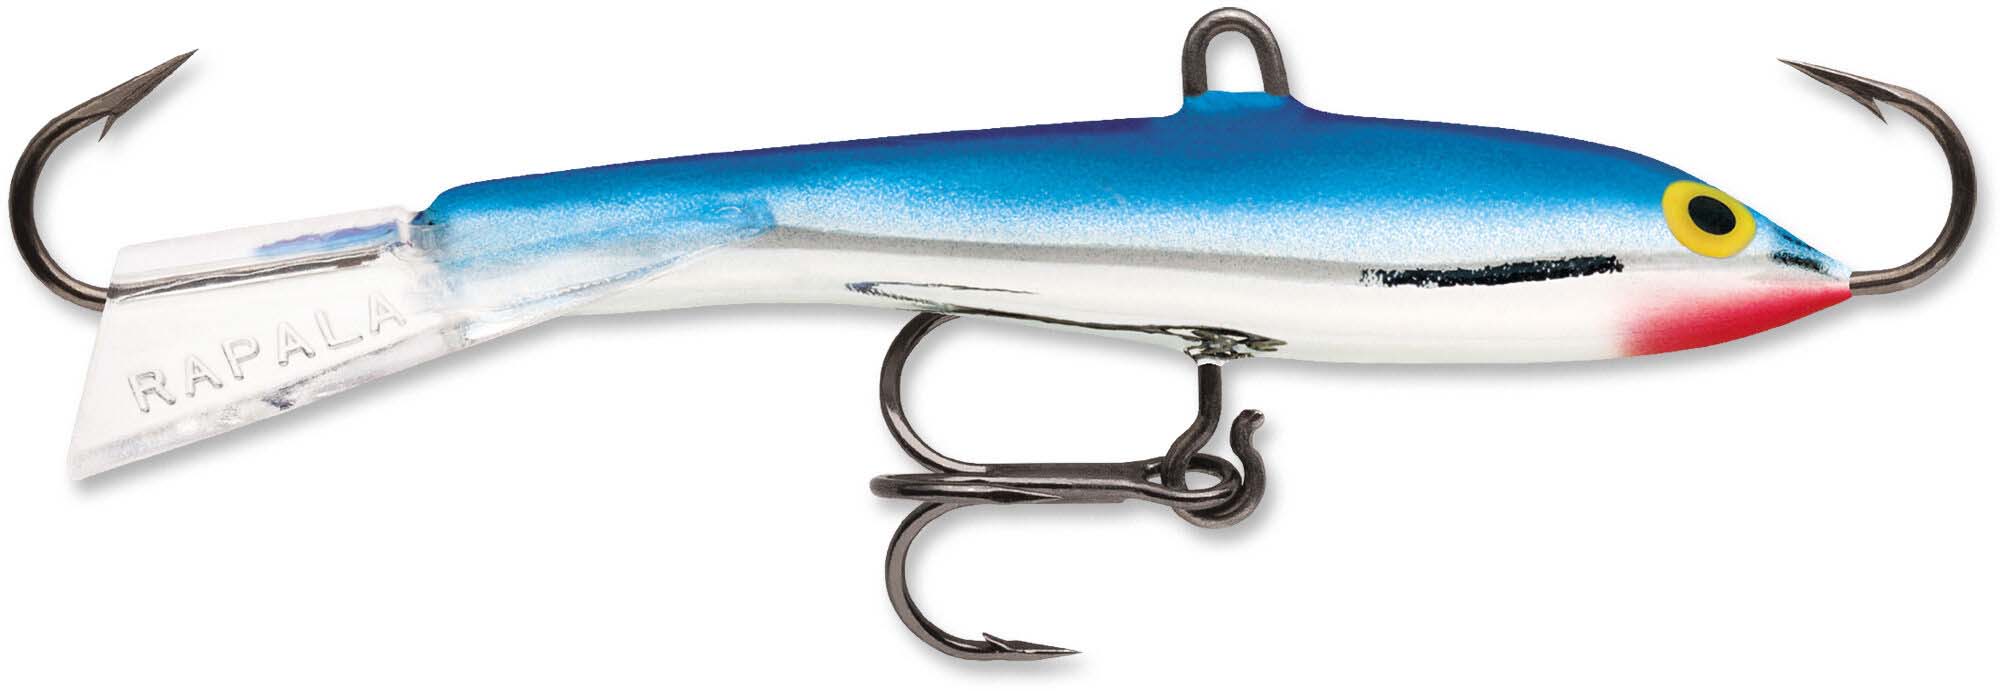 Rapala Jigging Rap 09 Lure  Up to 54% Off Free Shipping over $49!